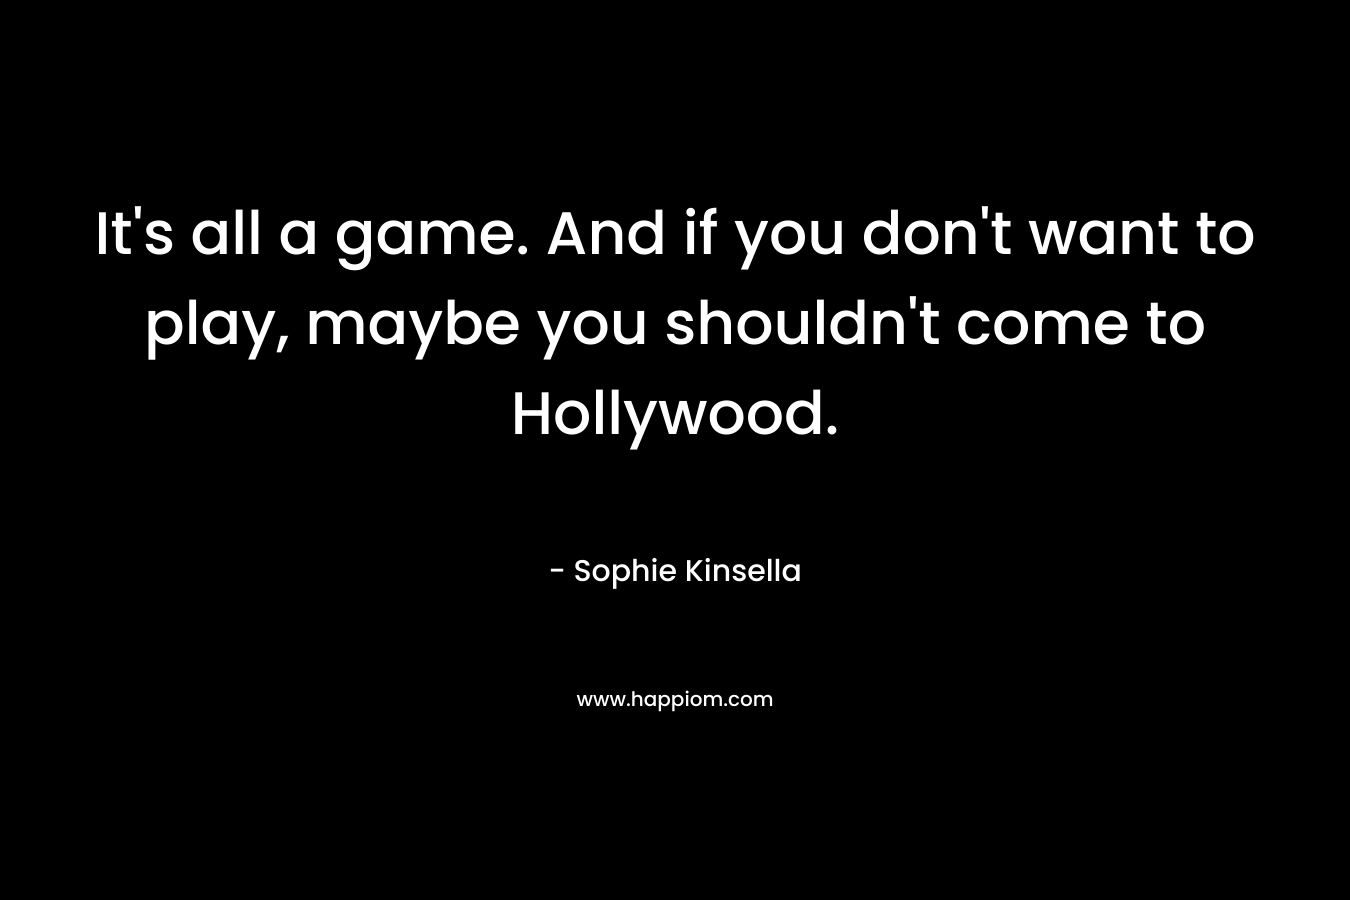 It's all a game. And if you don't want to play, maybe you shouldn't come to Hollywood.